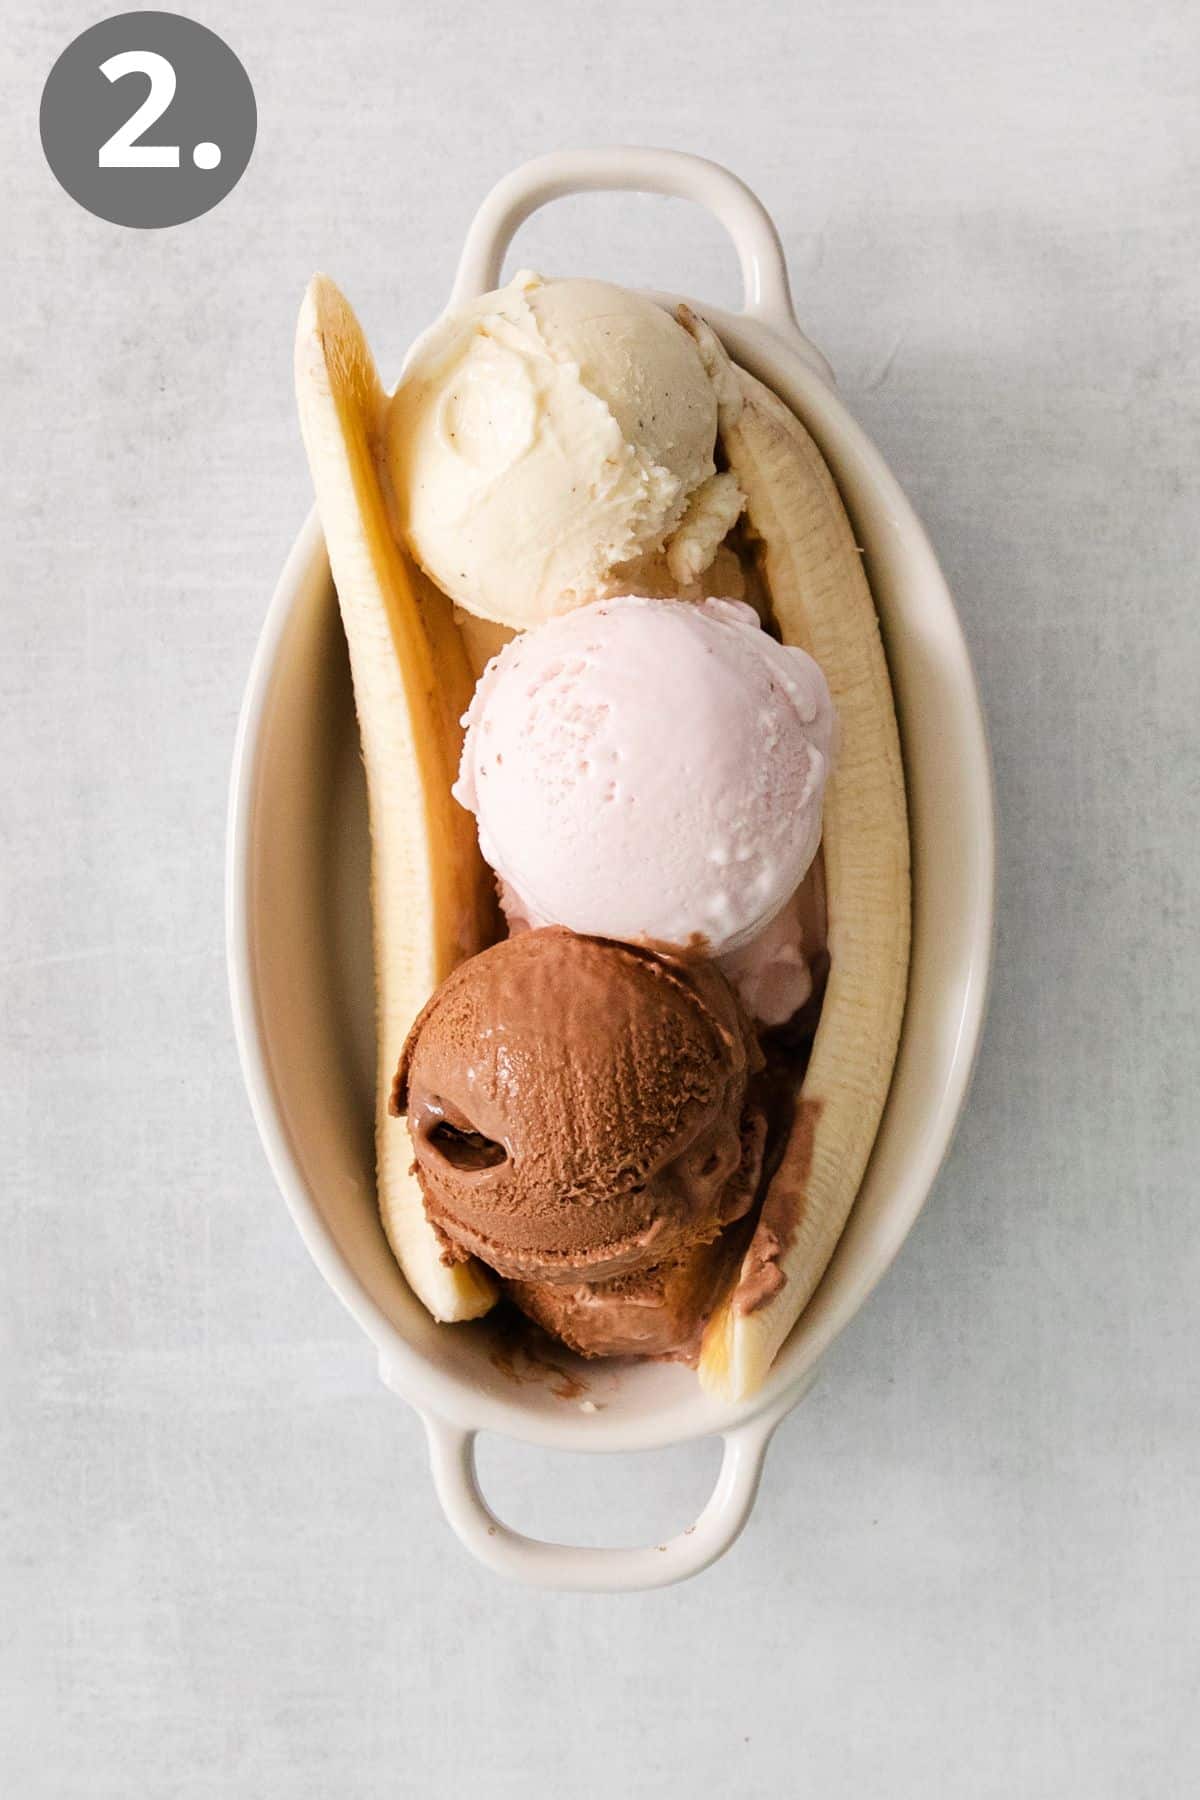 Three ice cream scoops and banana slices in a dish